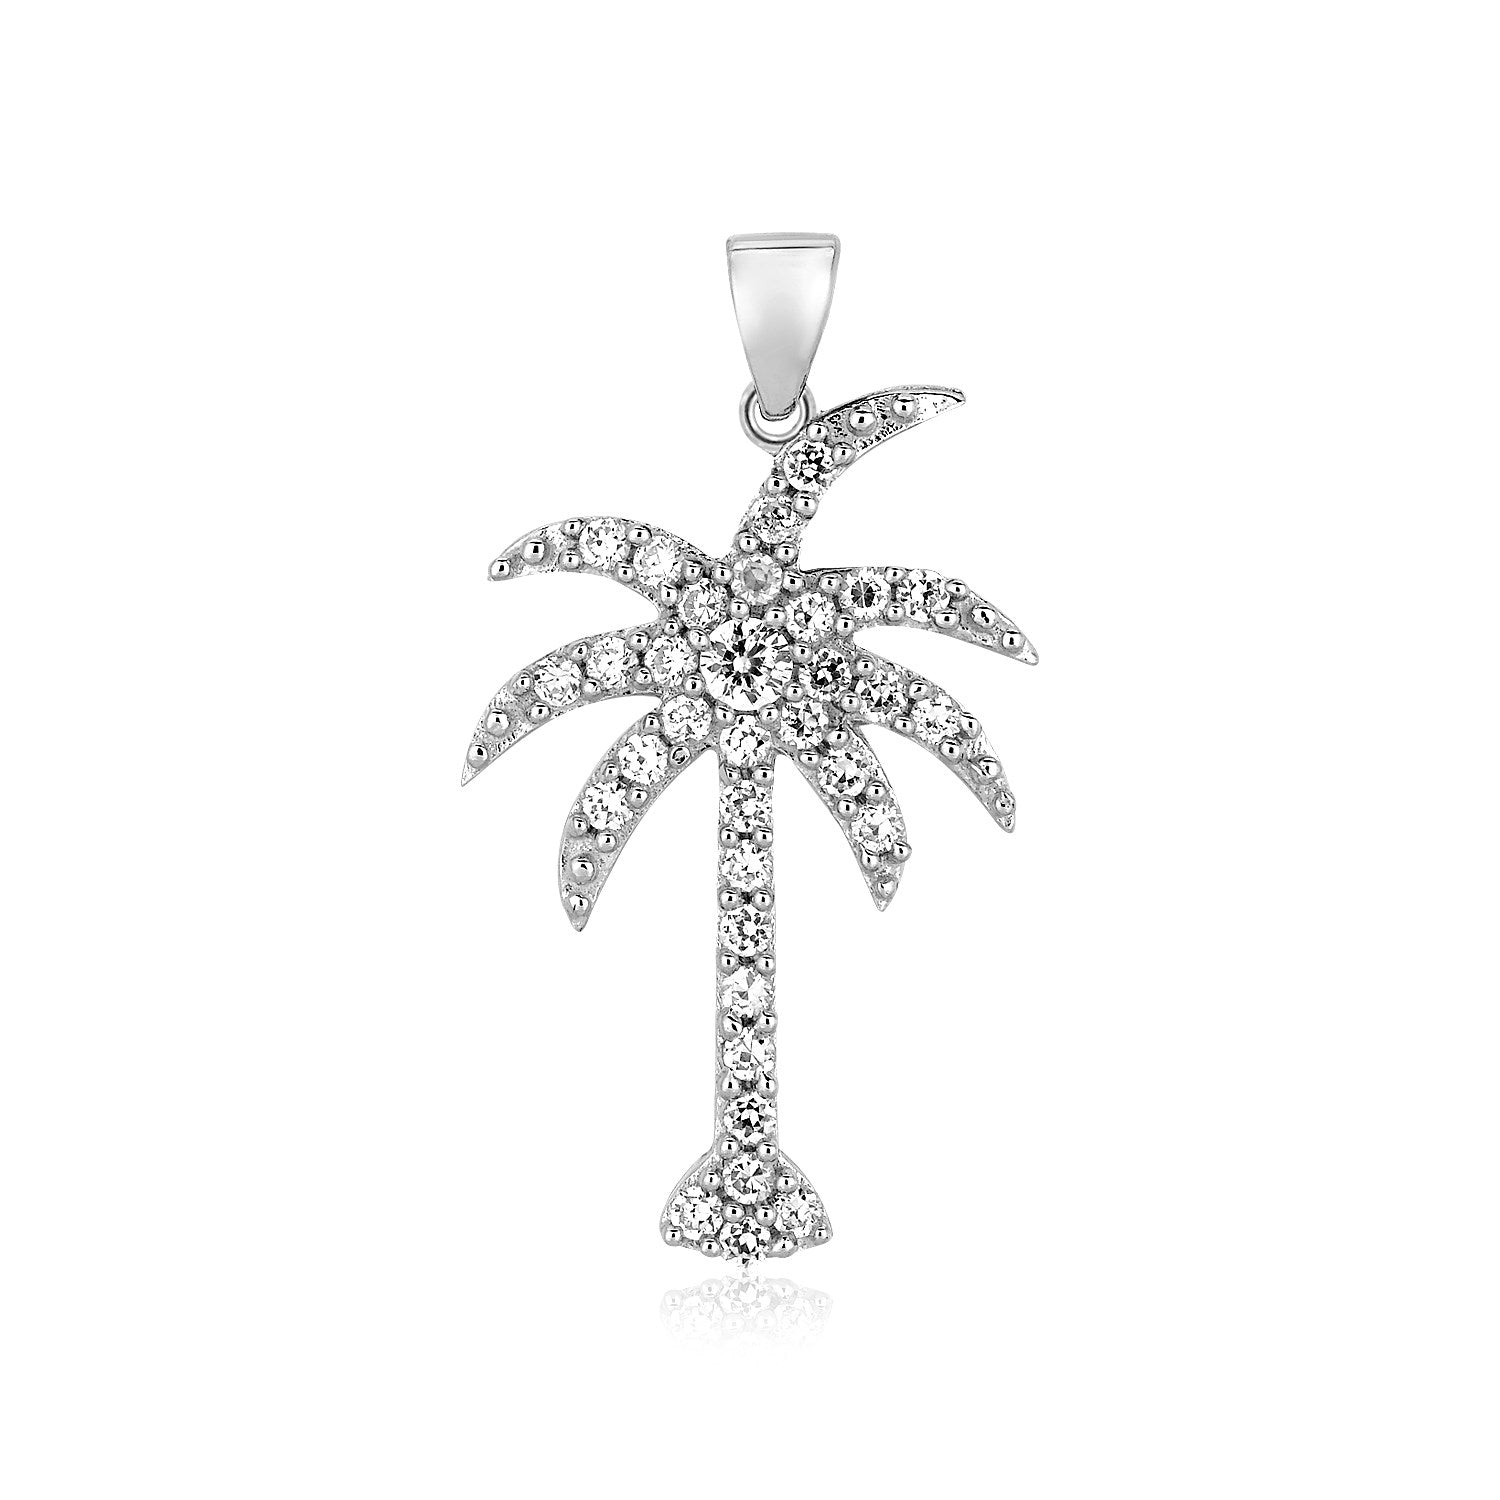 Sterling Silver Palm Tree Pendant with Cubic Zirconias